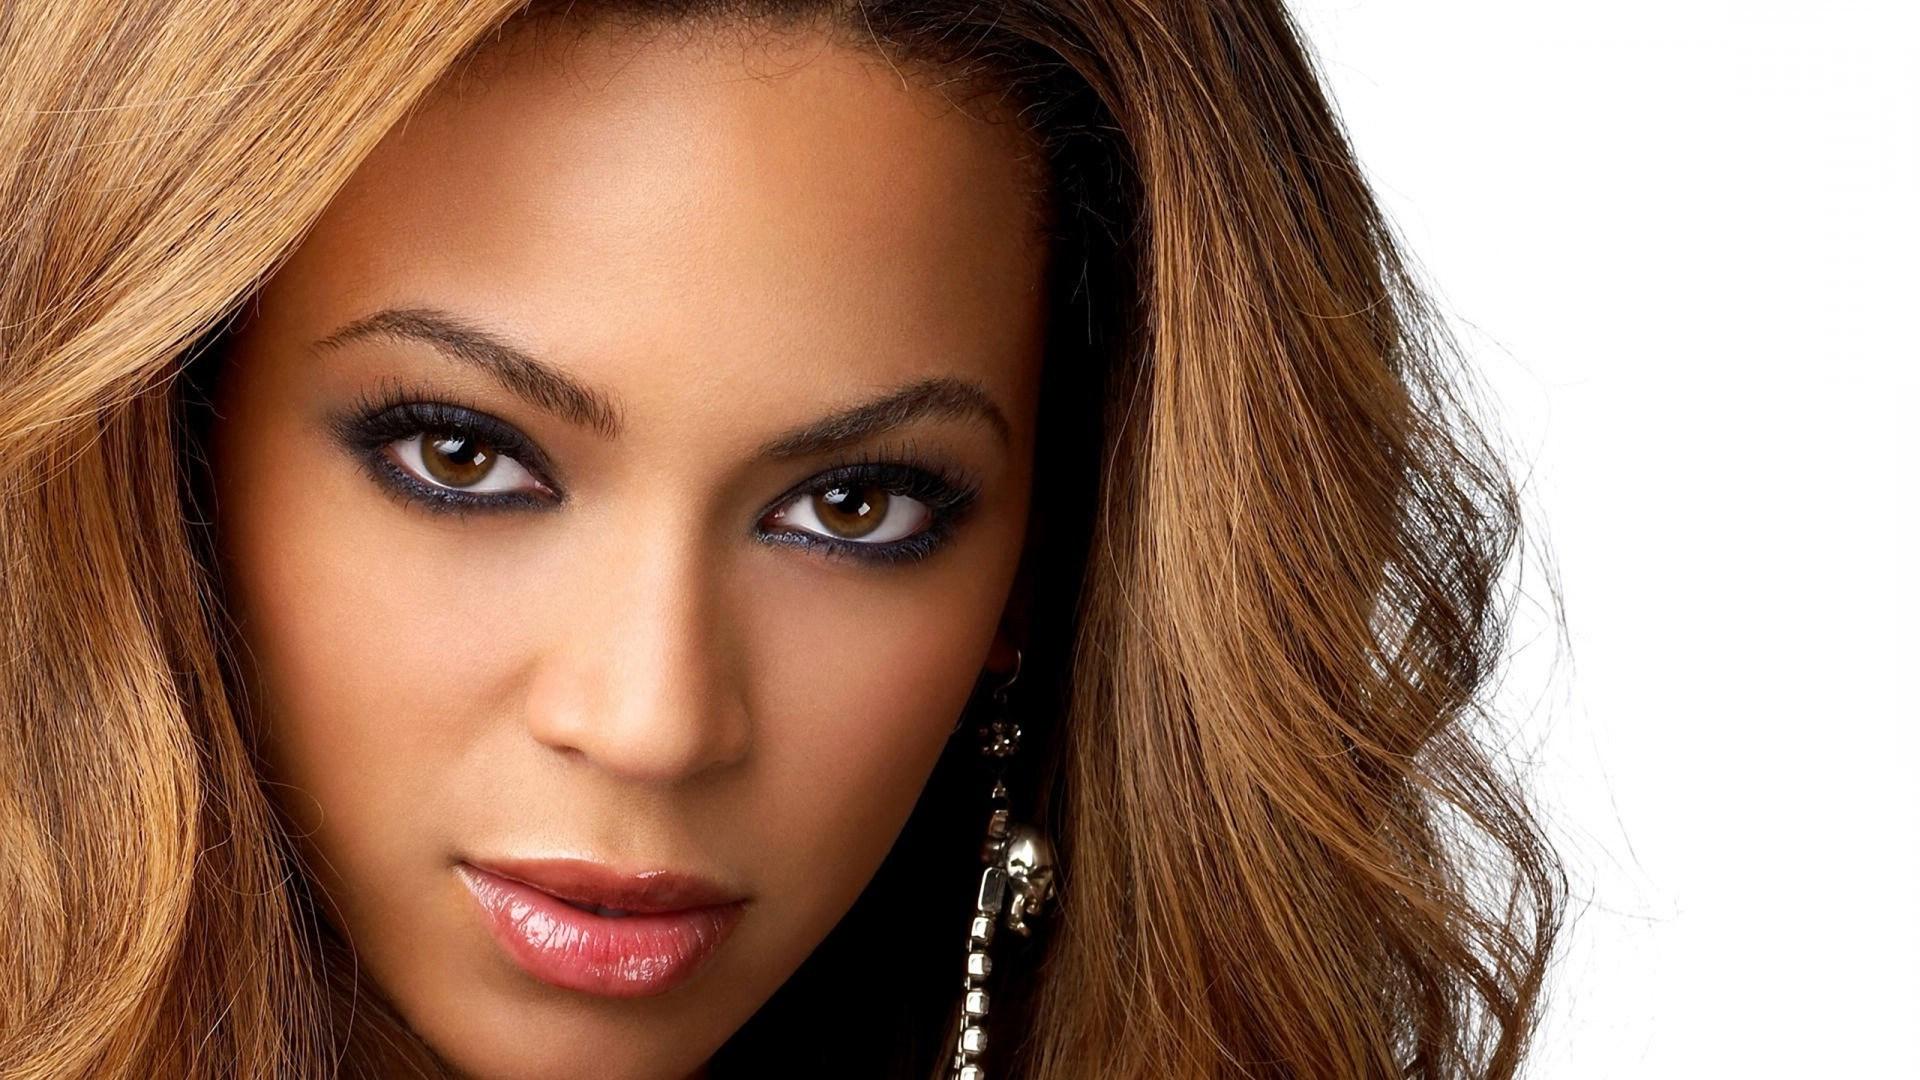 1920x1080 beyonce beautiful picture for wallpaper JPG 463 kB